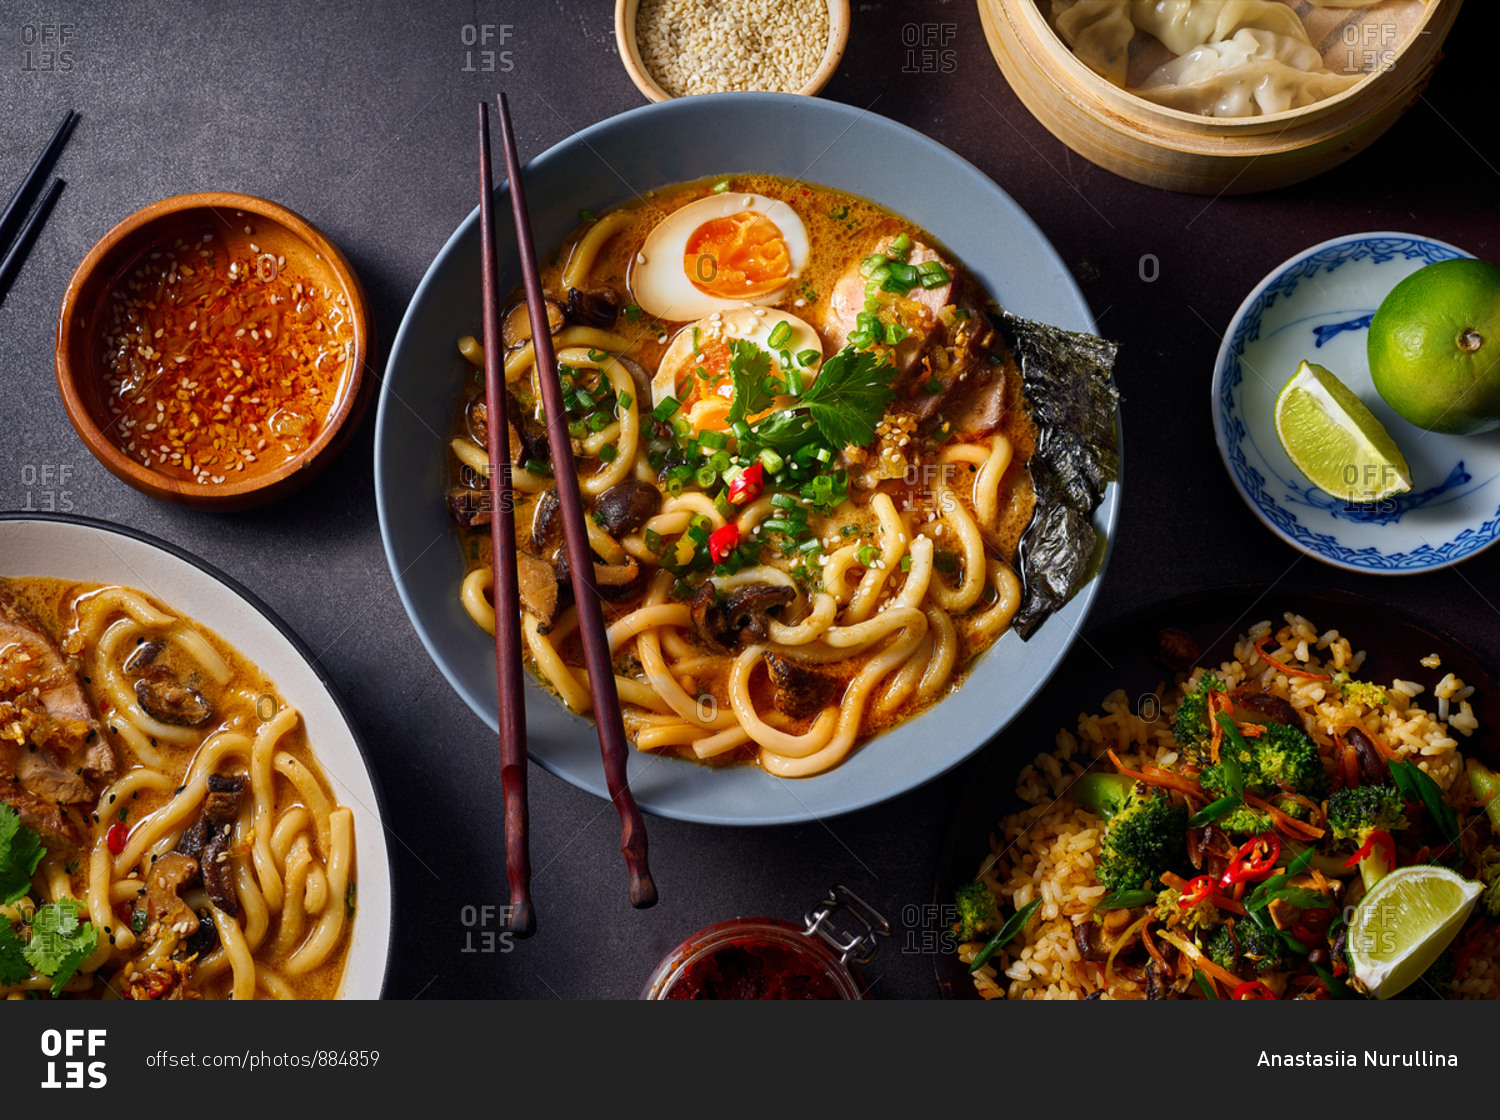 Asian cuisine dishes: pork ramen with soy-marinated eggs, vegetarian fried rice and gyoza dumplings served in a bamboo steamer